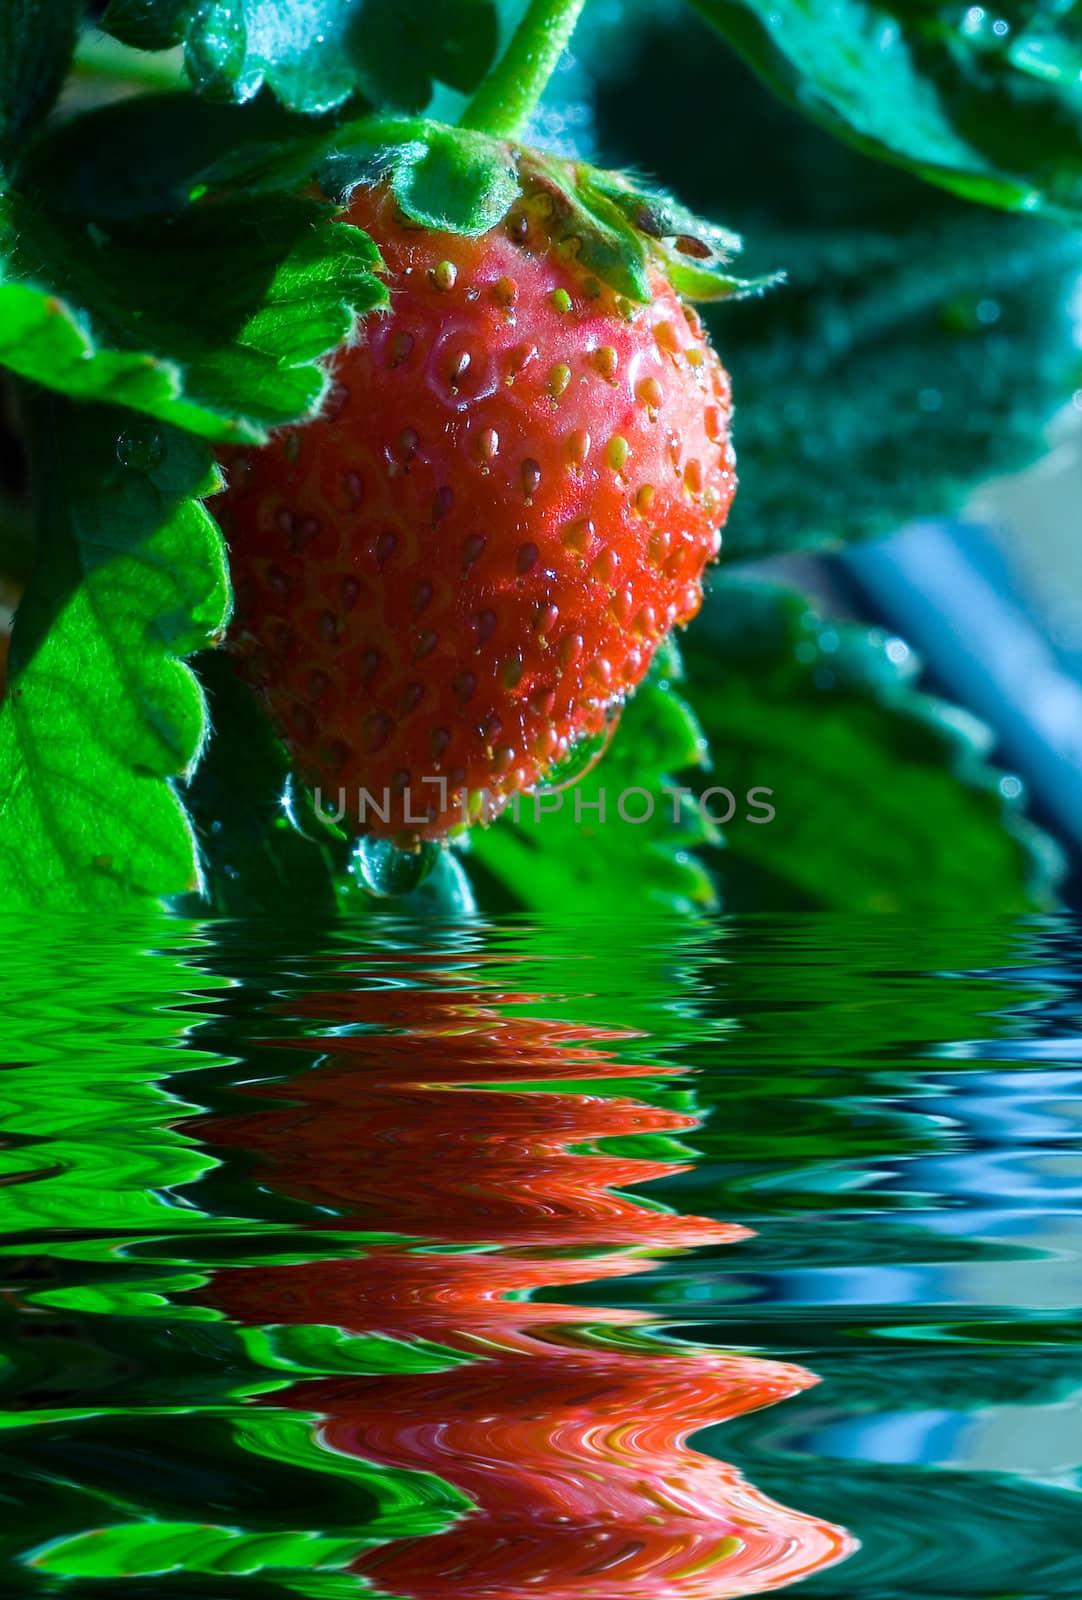 Thrickets of a strawberry by Vladimir